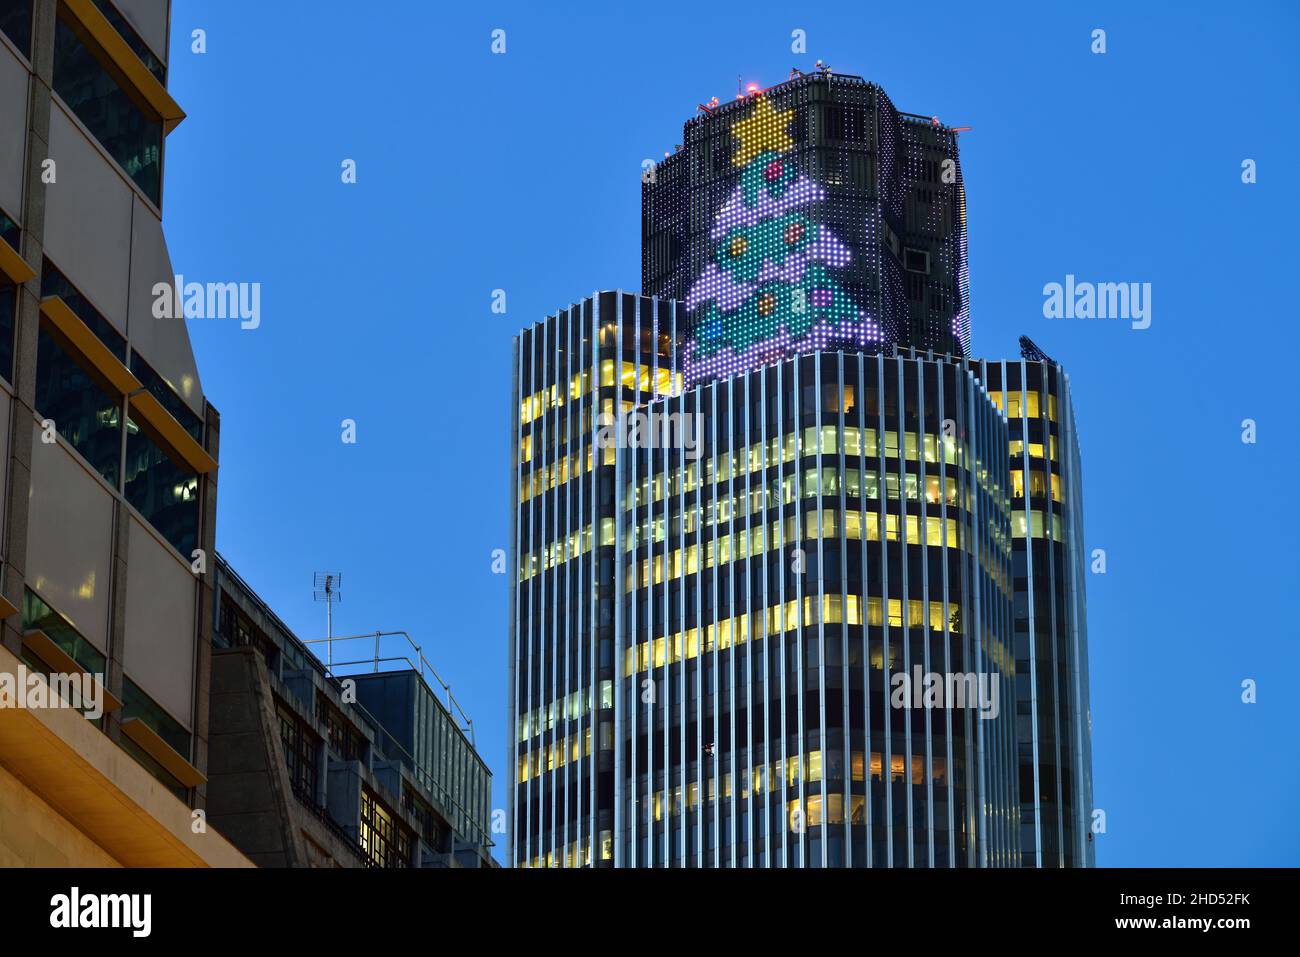 December evening Tower 42 or NatWest Tower, 25 Old Broad Street, City of London, United Kingdom Stock Photo